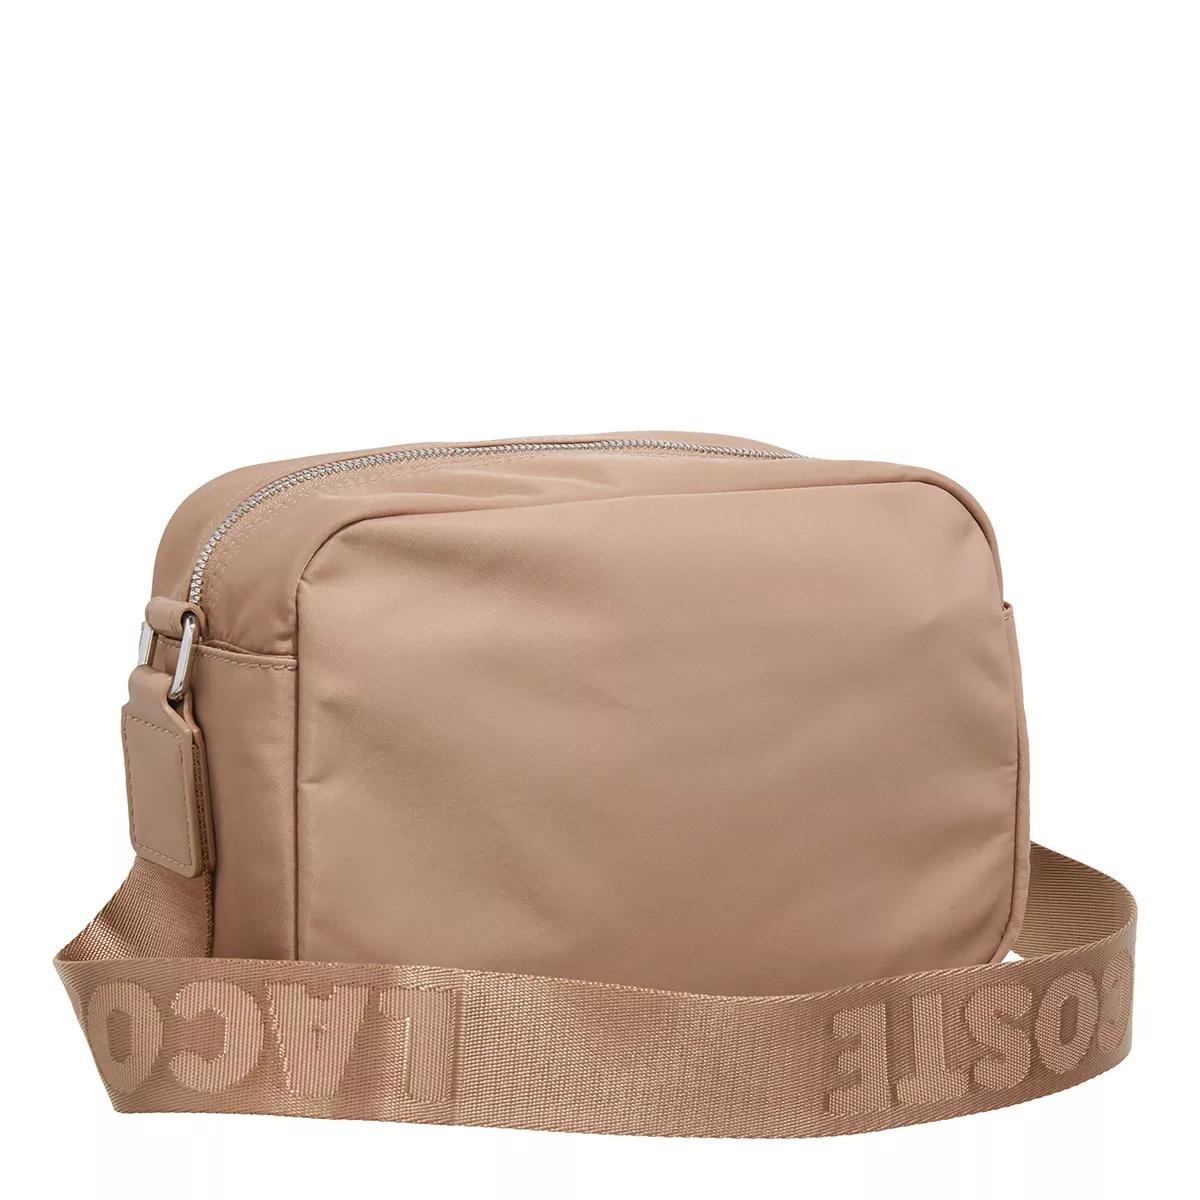 Lacoste Crossbody bags Crossover Bag in beige